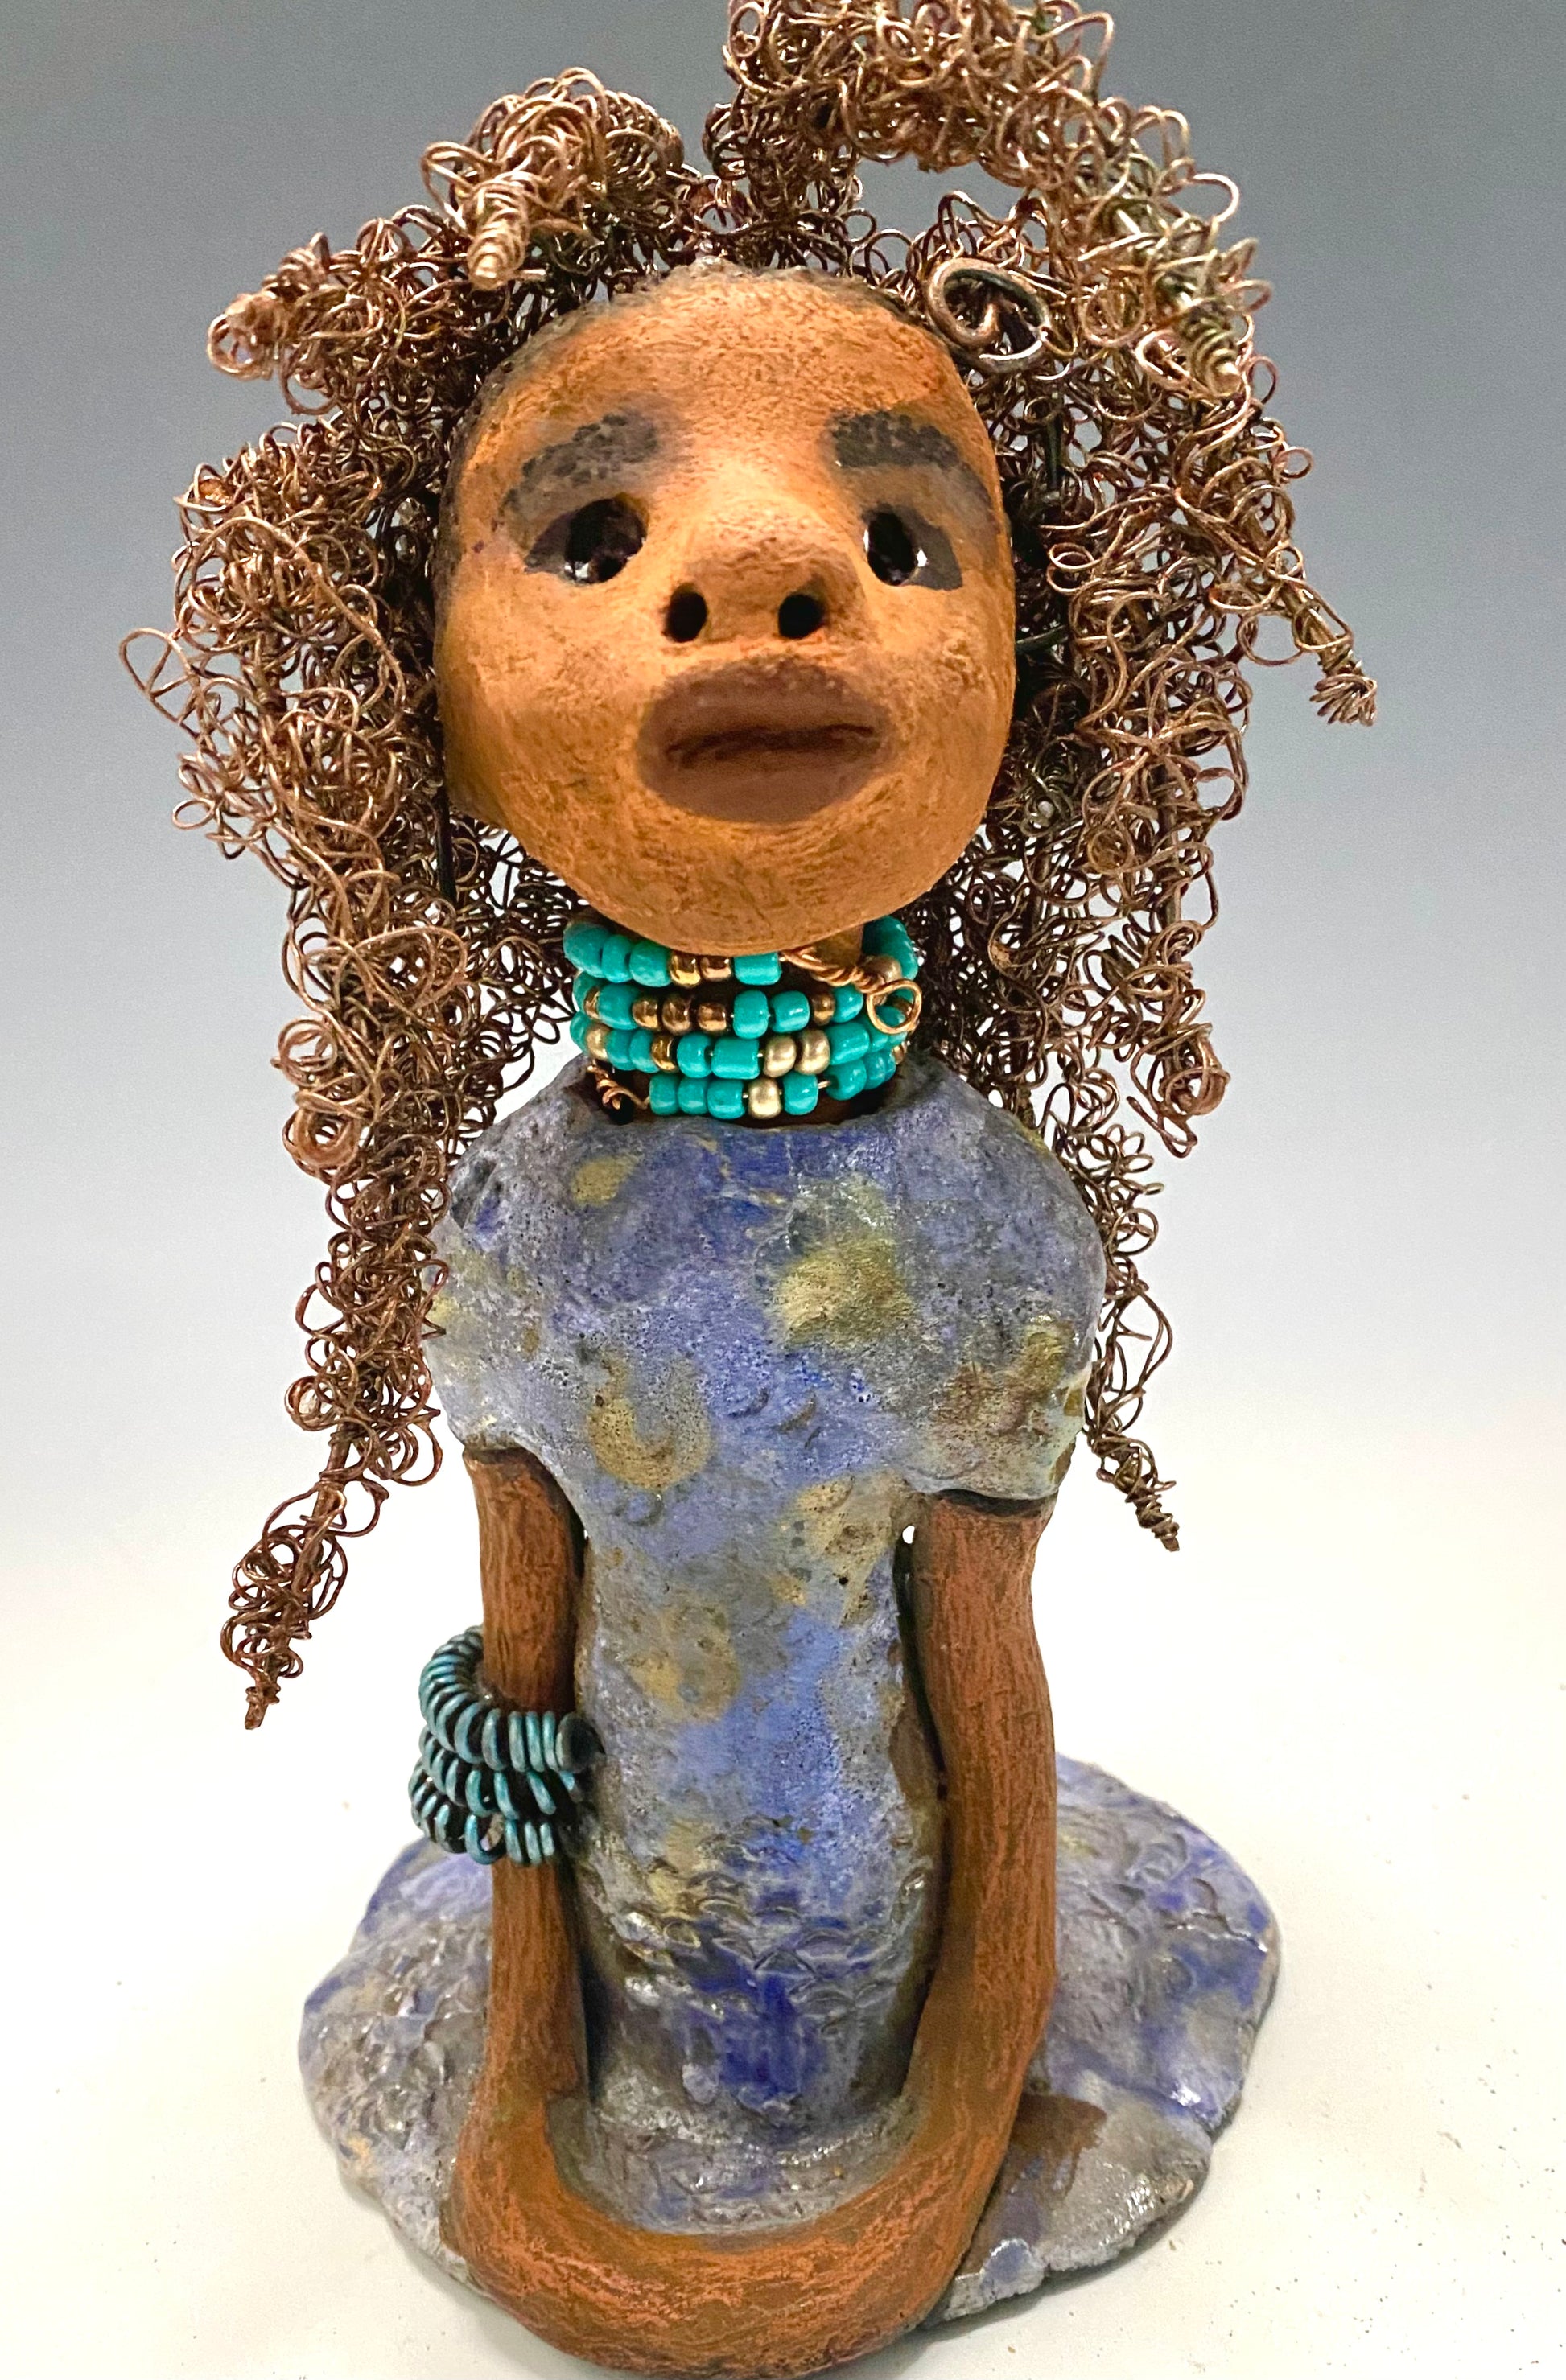 Meet Janae'! She has grown a head full of Hair! Janae' stands 8" x 5" x 4" and weighs 1.03 lbs. She has a lovely honey brown complexion with lovely reddish brown lips. Janae' wears a clay braided hairstyle. Janae' has a colorful metallic blue and gold glazed dress. She wears a blue and antique copper  beaded necklace. With eyes wide opened, Janae' has hopes of finding a new home.  